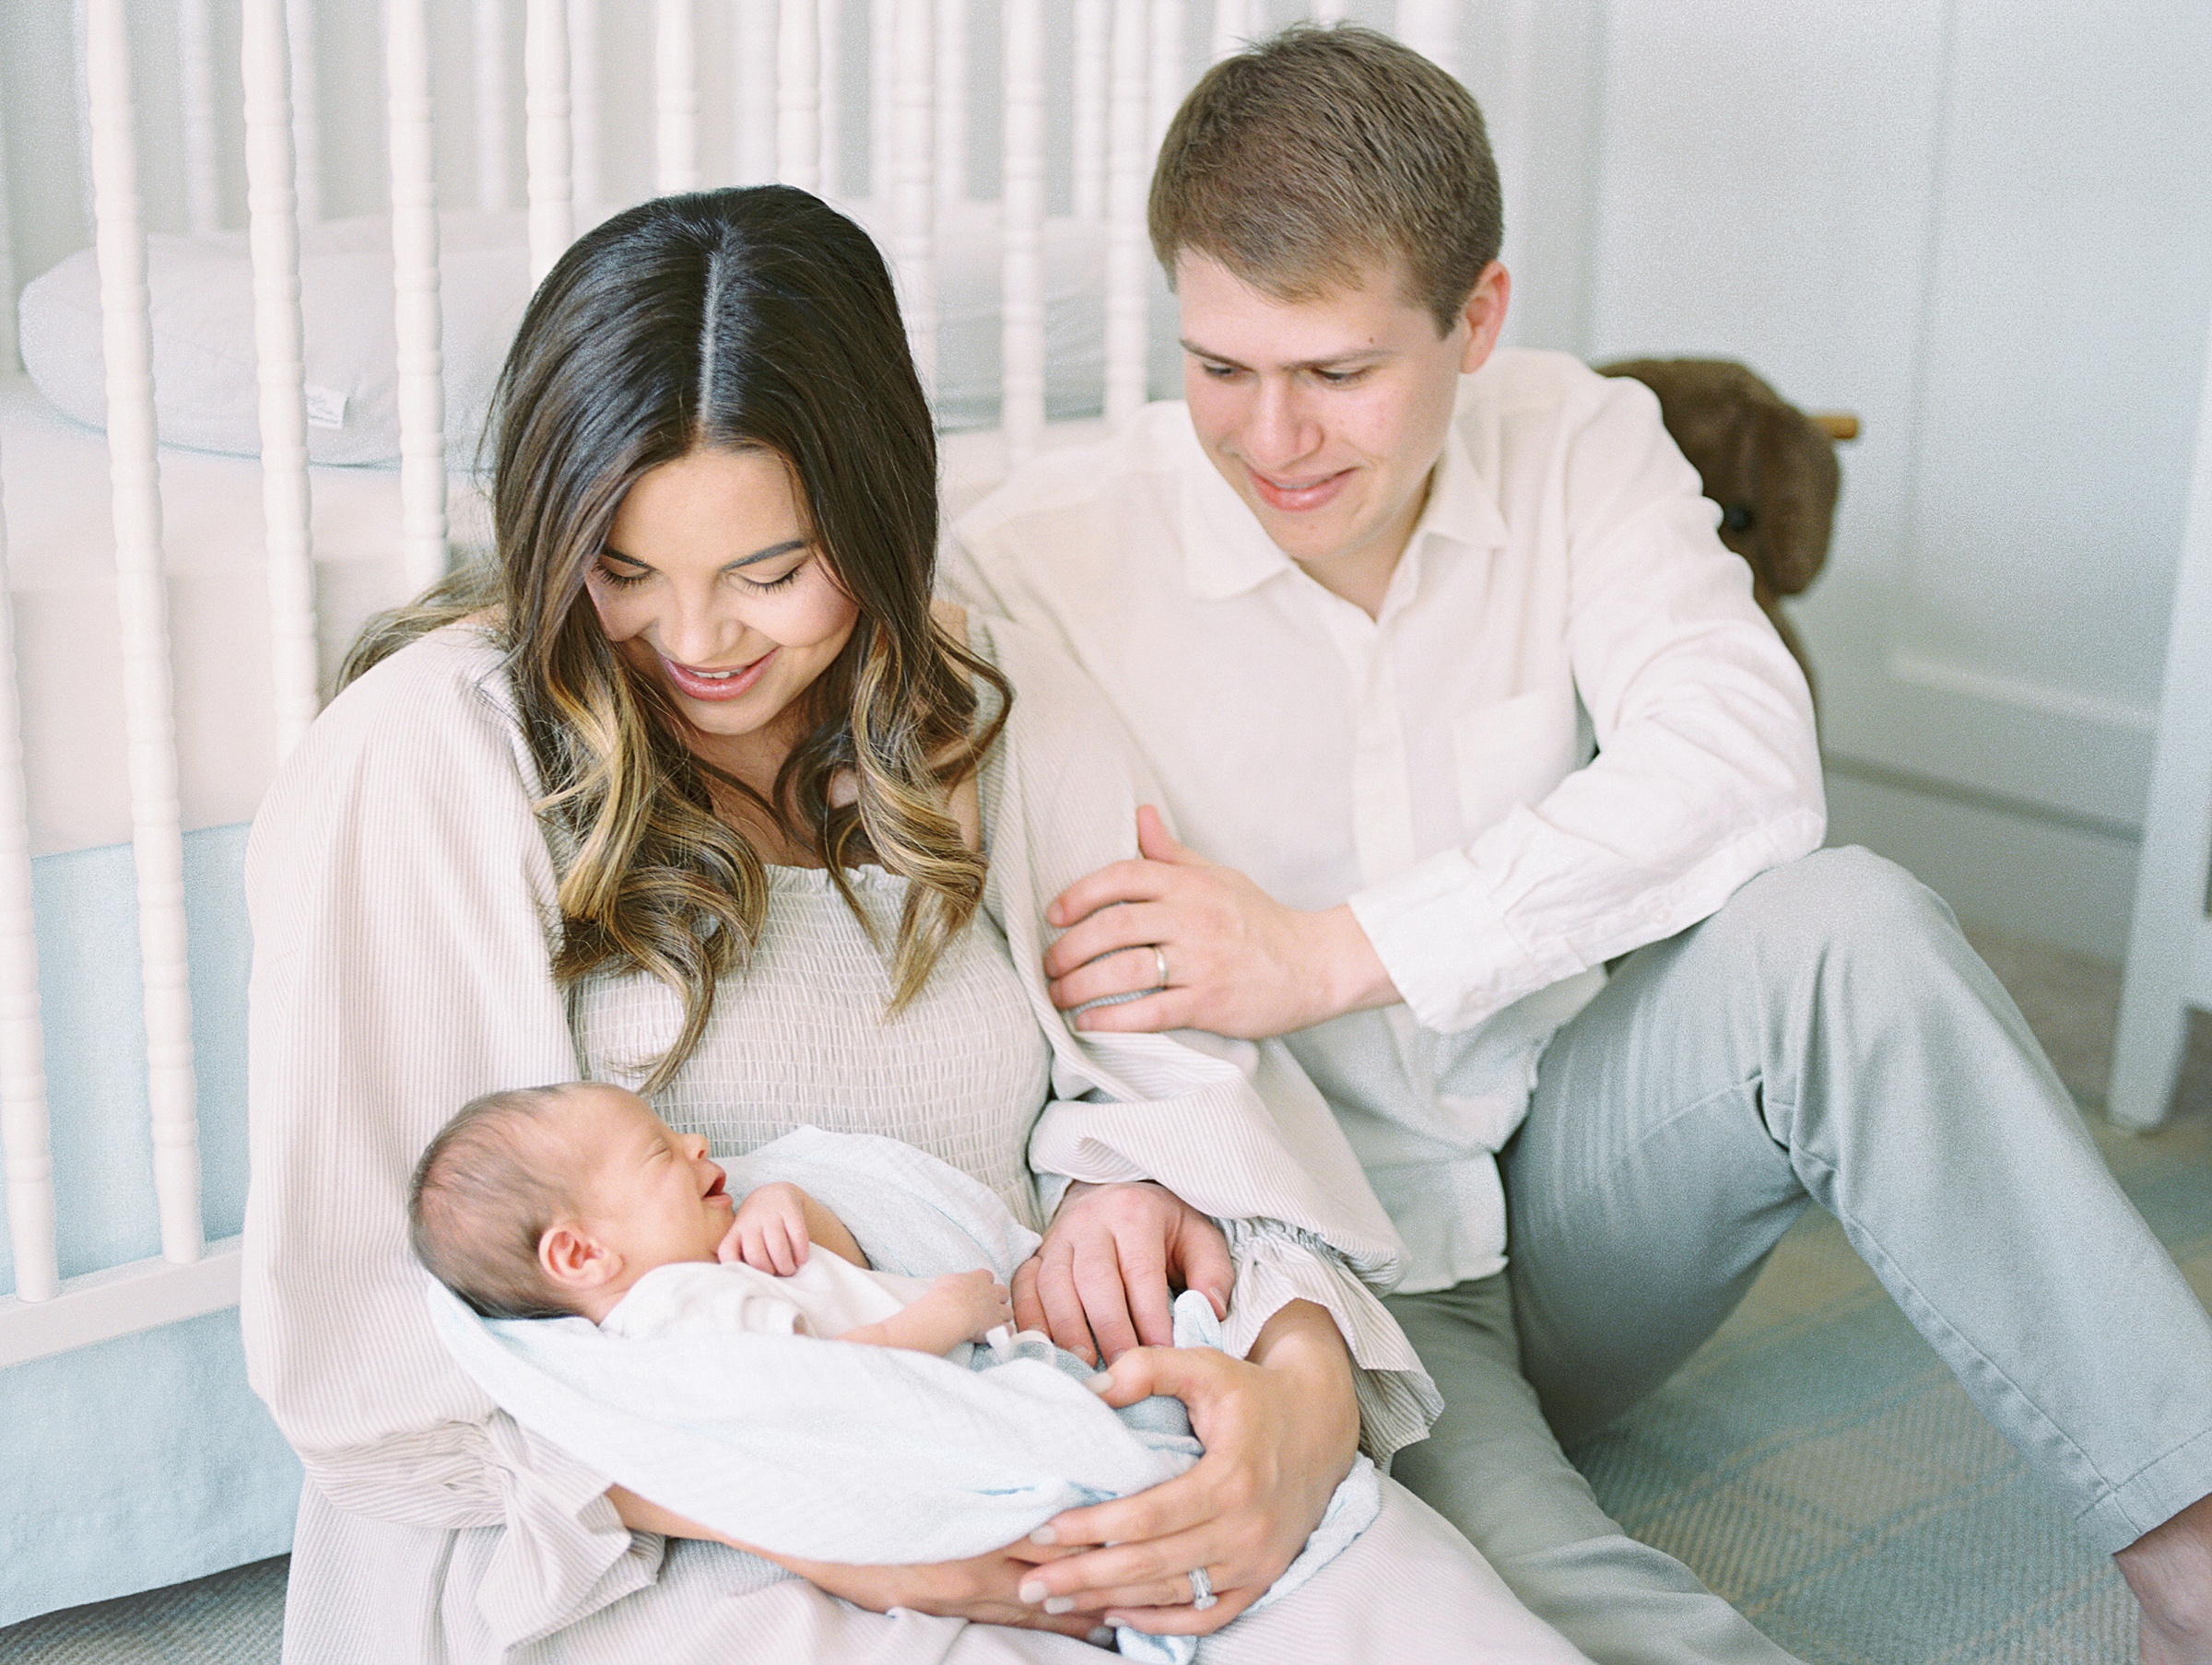 New parents admire their newborn baby boy during in-home newborn session